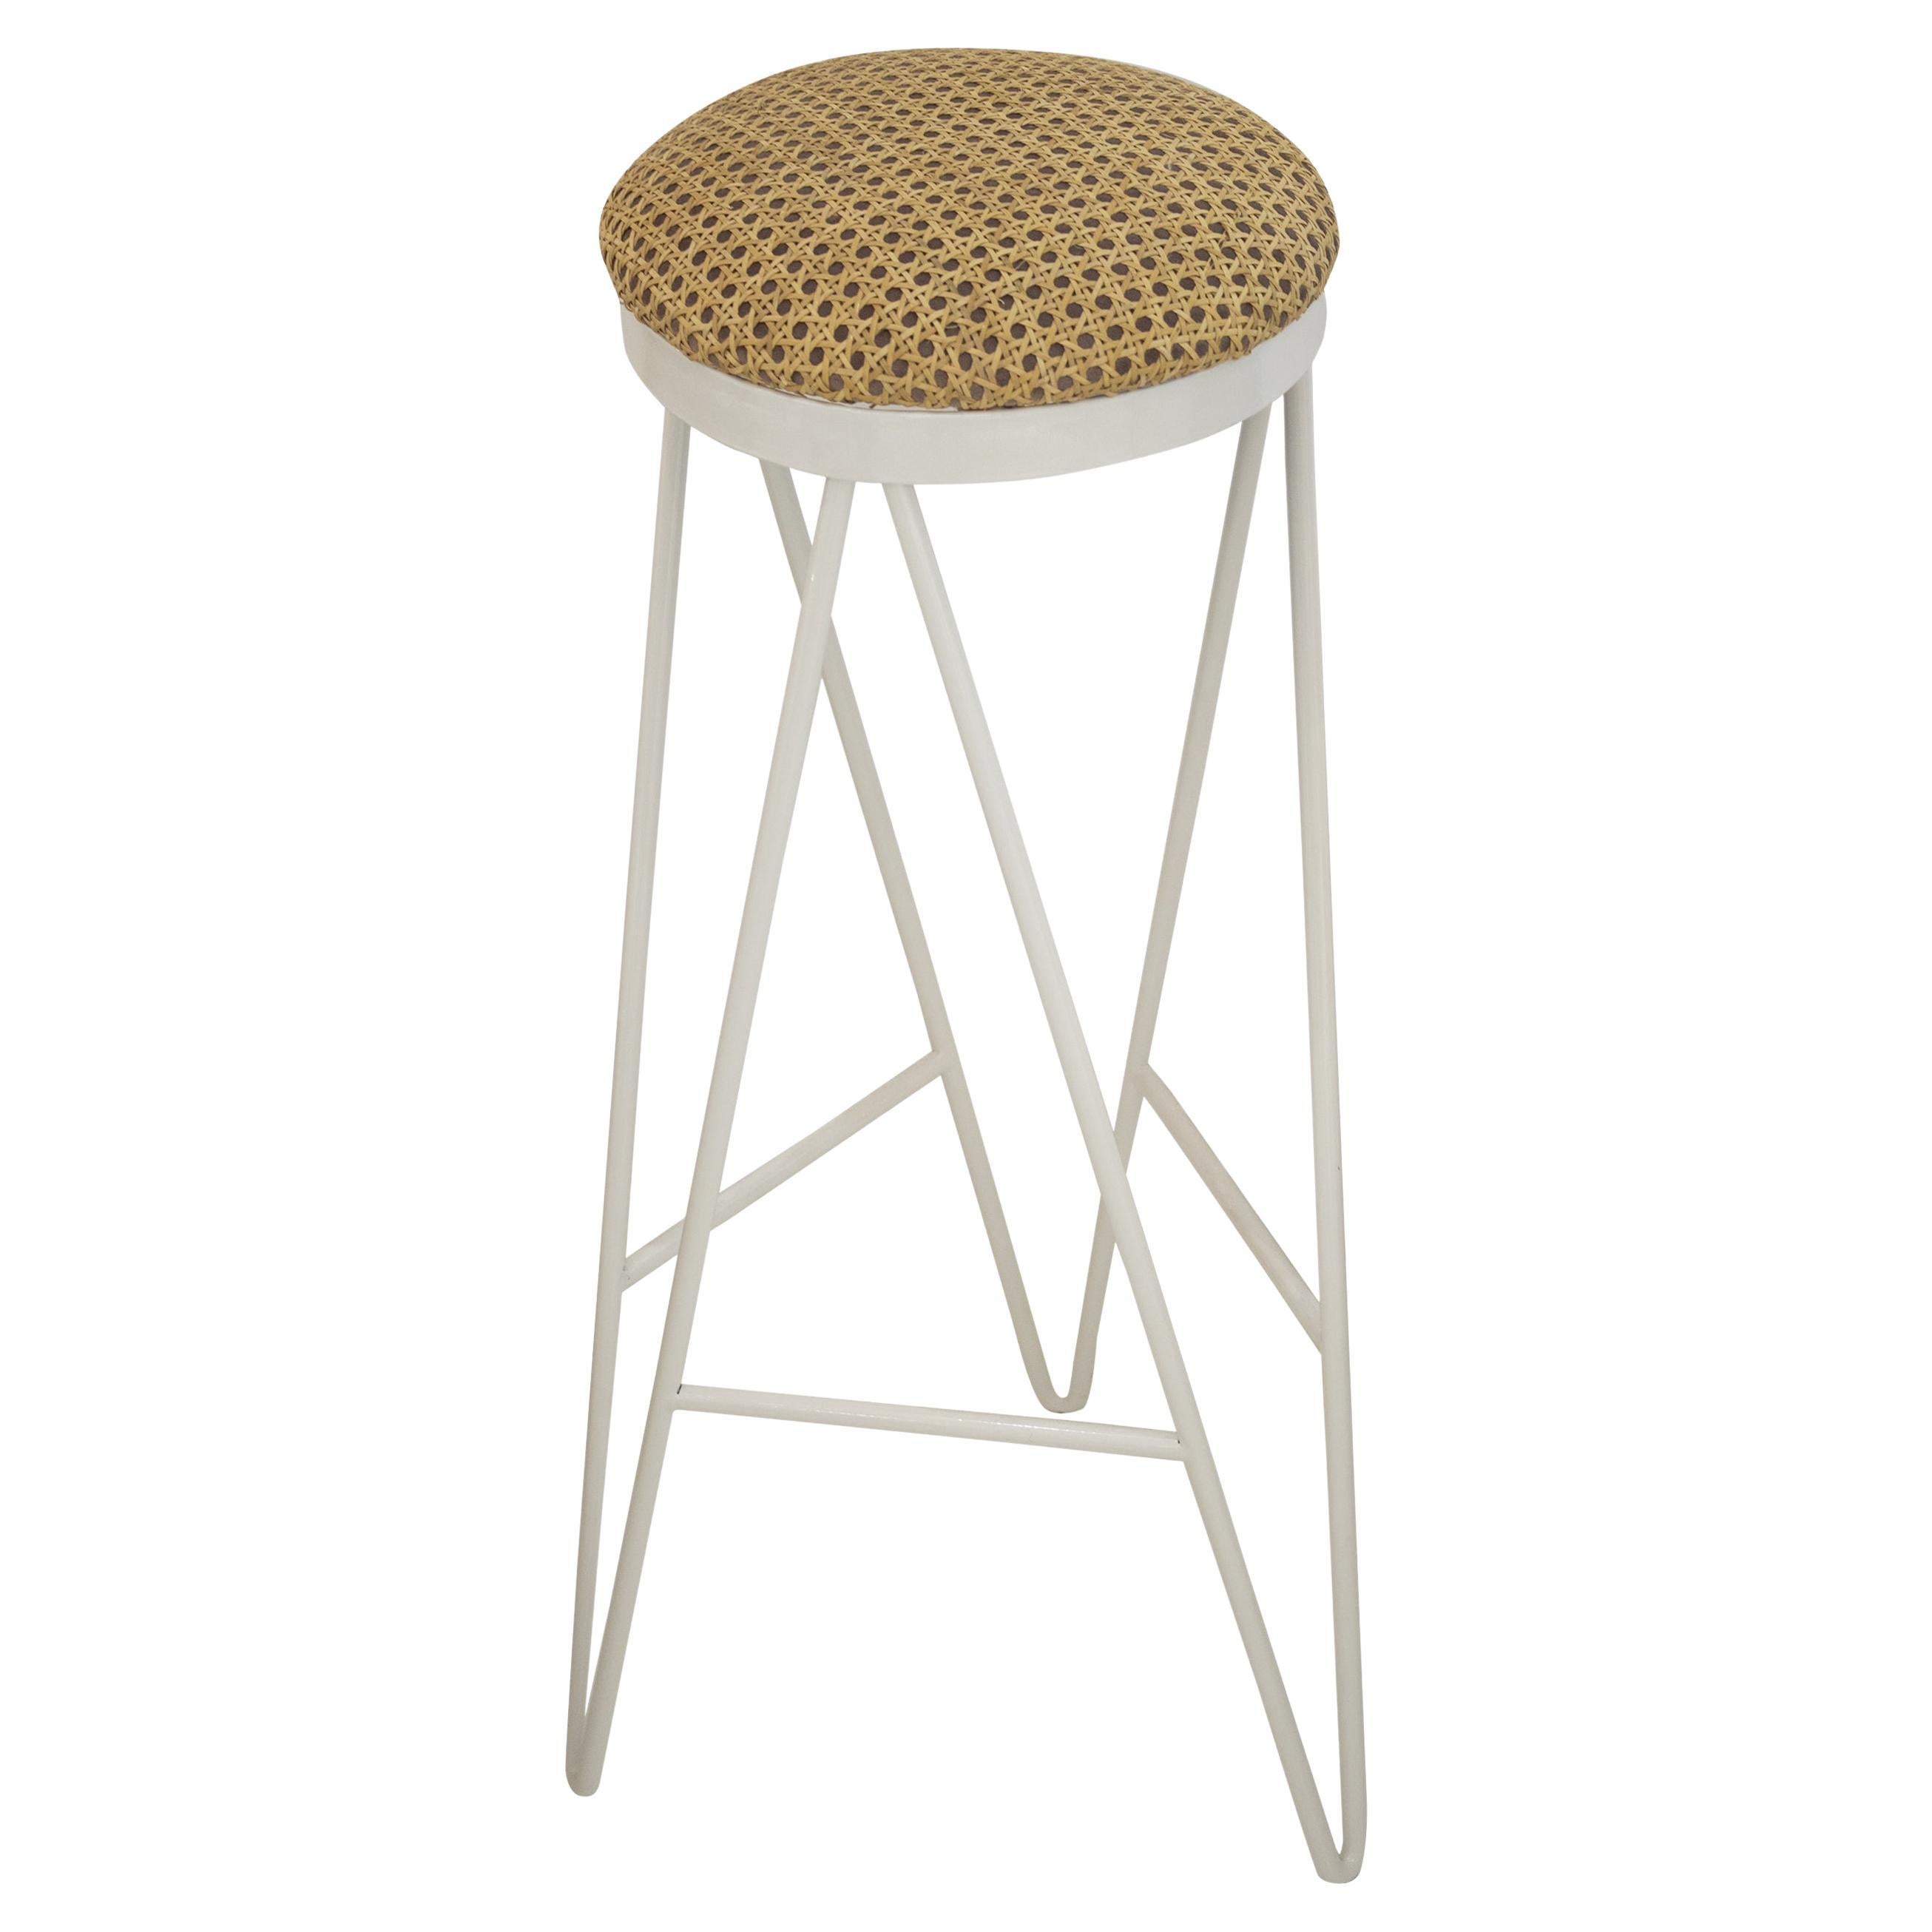 Contemporary bar stool designed by IKB191 Studio in a limited edition.
It consists of a white lacquered steel structure, and a foam seat, upholstered in wicker.
Made in Spain, 2022.